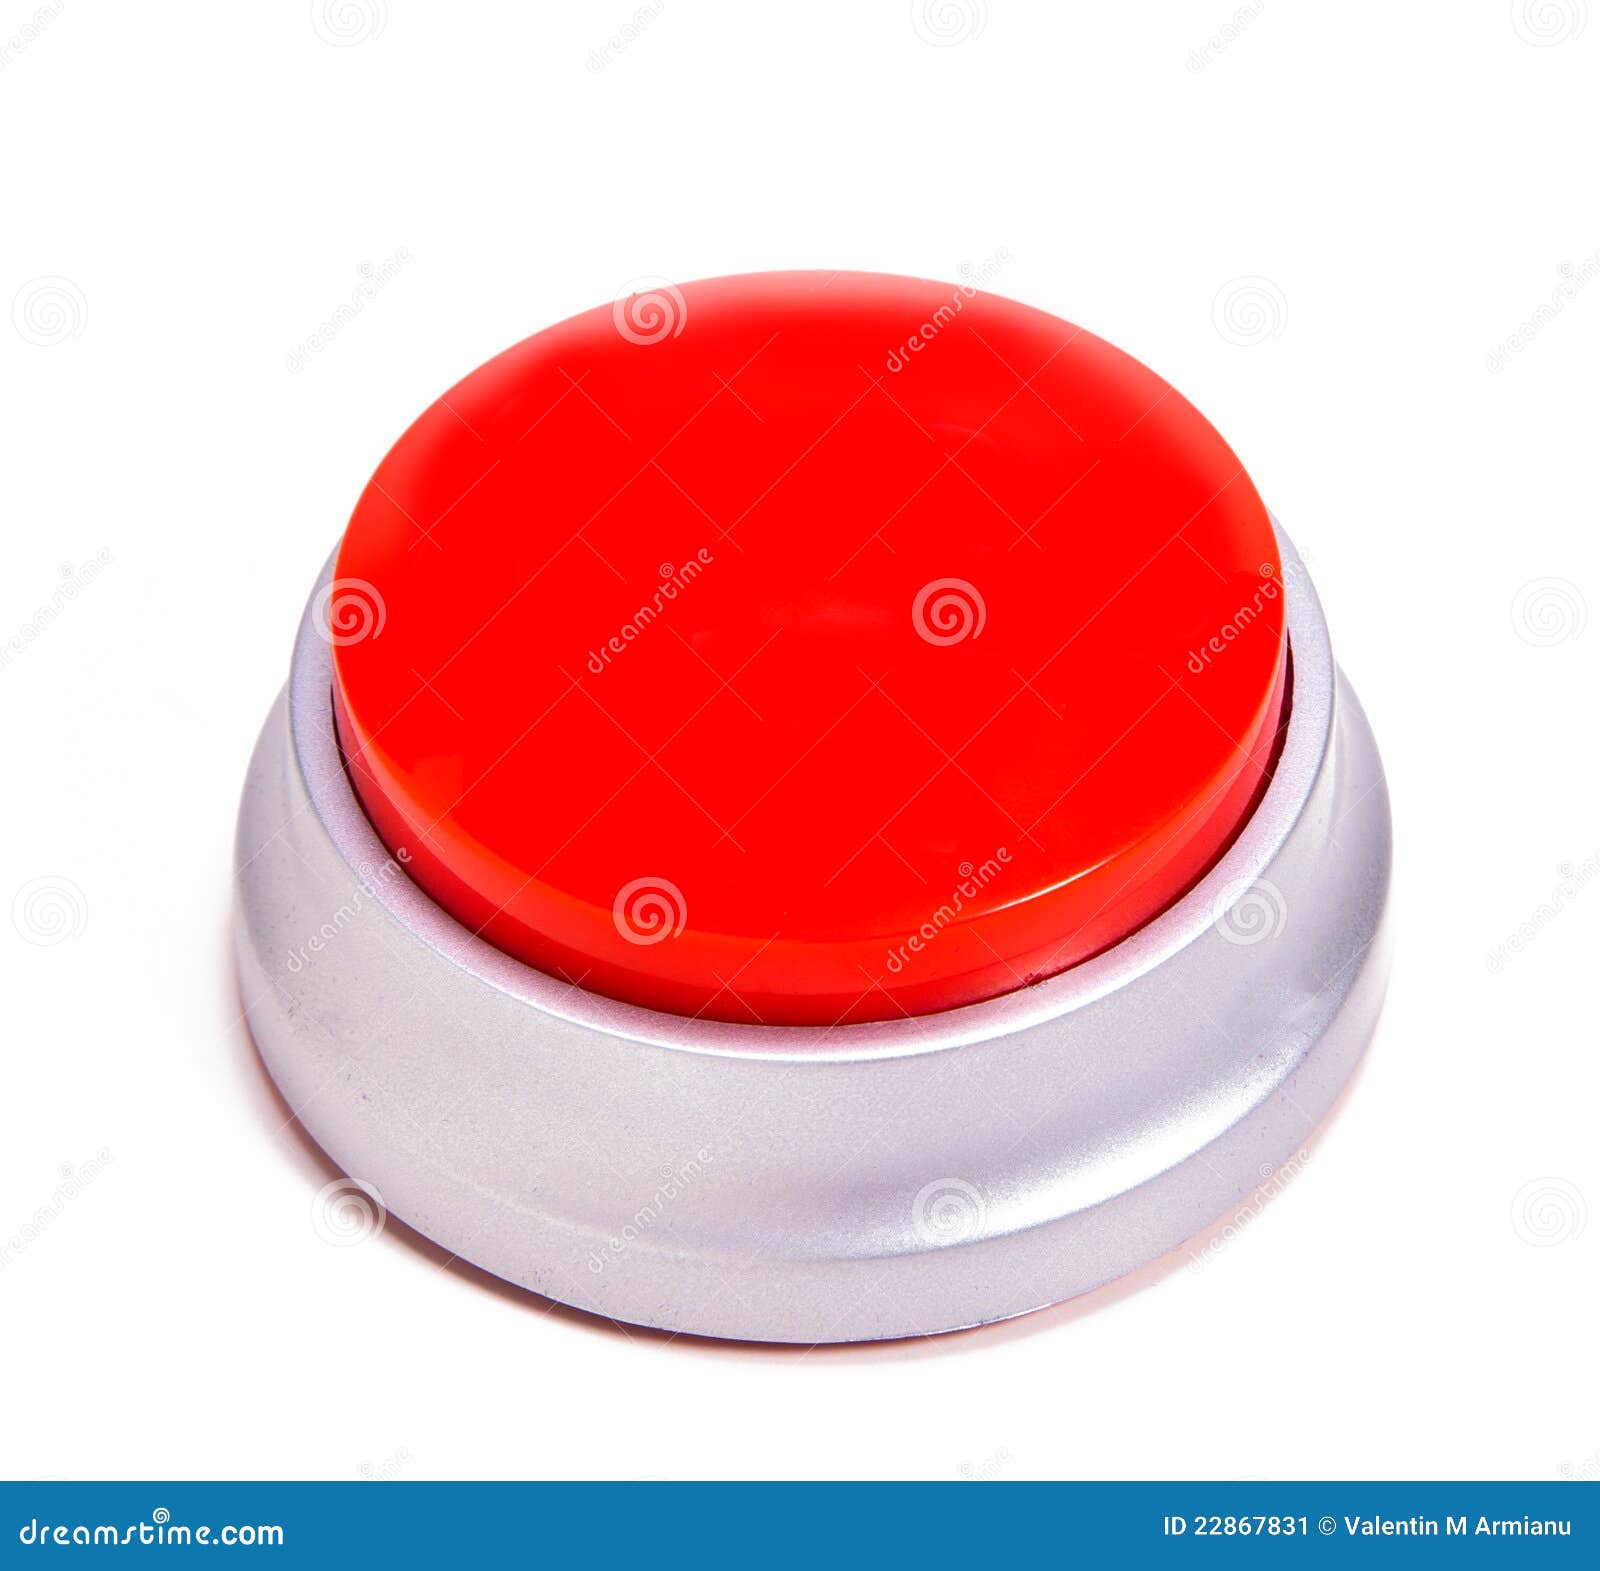 red button